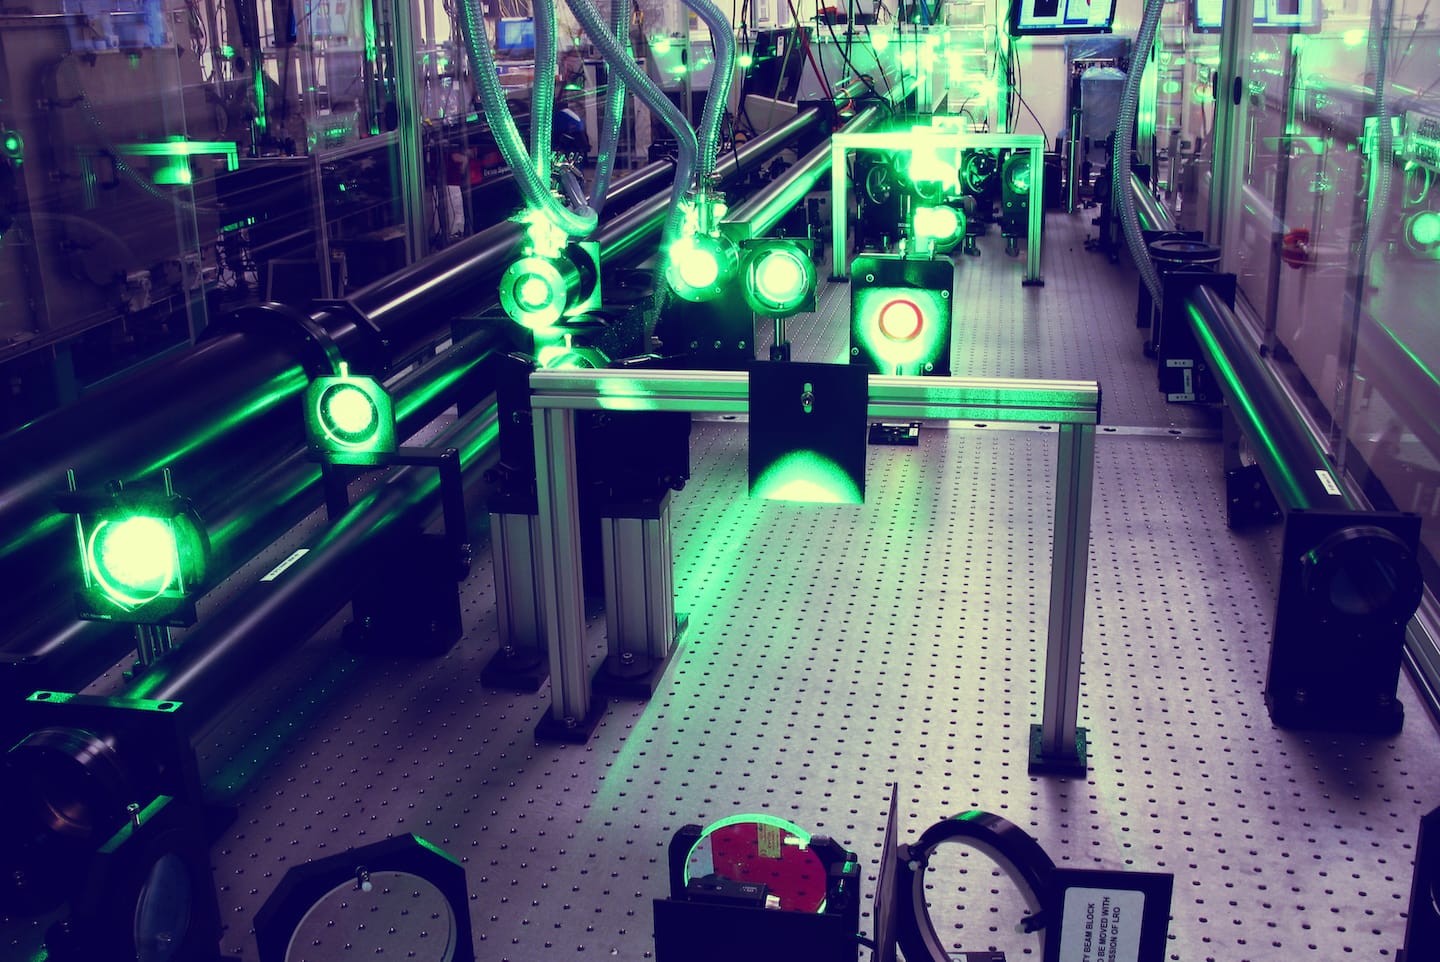 The Gemini amplifier. The image shows several green lights in a dark room on a metal floor (Image: STFC/Clear Laser Facility)